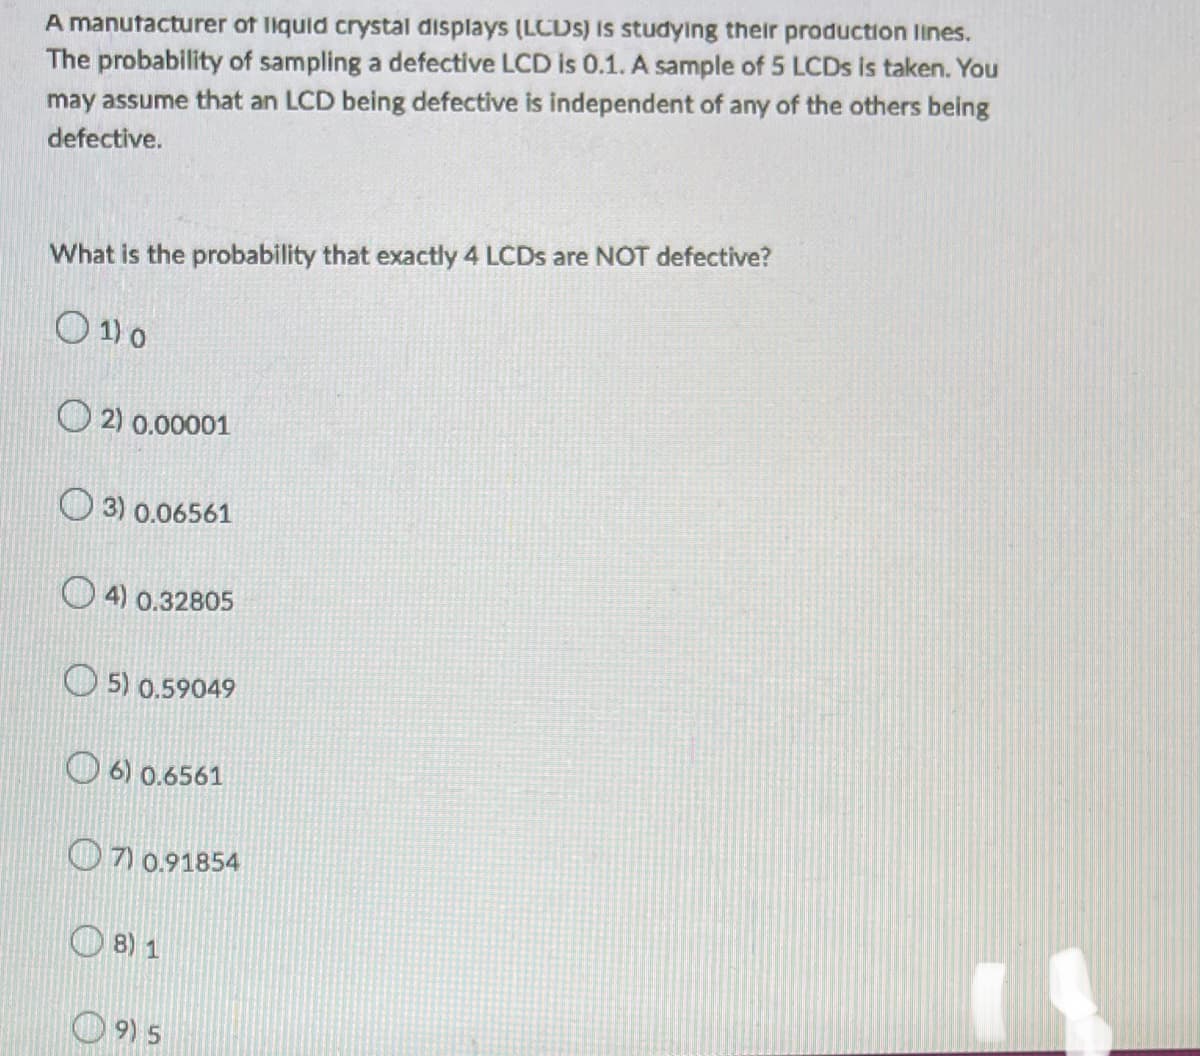 A manufacturer of liquid crystal displays (LCDS) is studying their production lines.
The probability of sampling a defective LCD is 0.1. A sample of 5 LCDs is taken. You
may assume that an LCD being defective is independent of any of the others being
defective.
What is the probability that exactly 4 LCDs are NOT defective?
01) 0
2) 0.00001
3) 0.06561
4) 0.32805
5) 0.59049
6) 0.6561
7) 0.91854
8) 1
9) 5